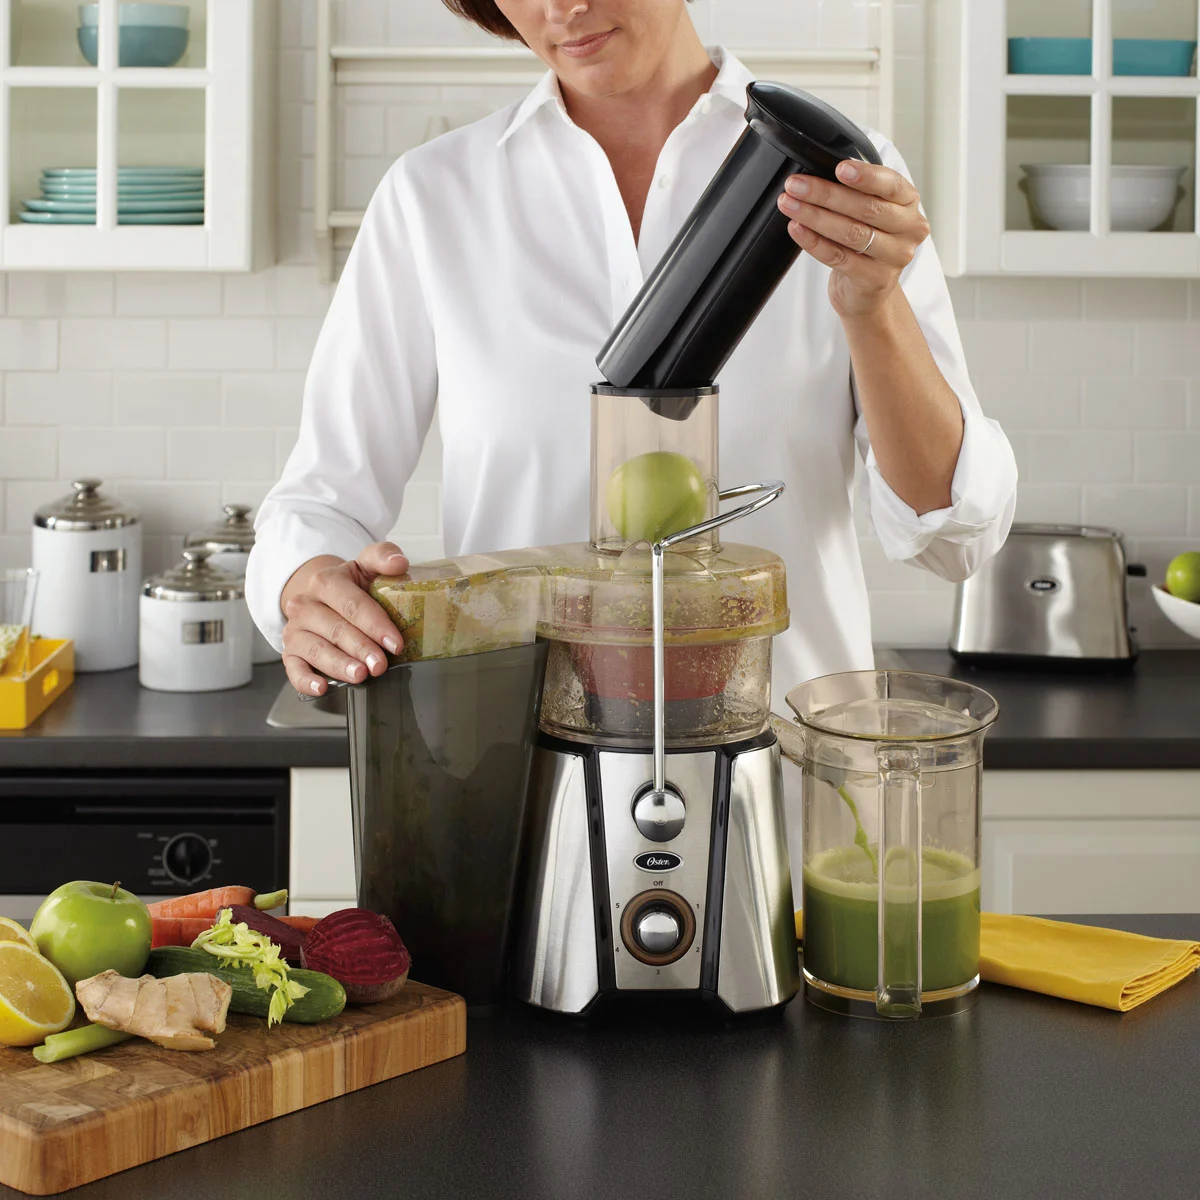 How To Use A Juicer